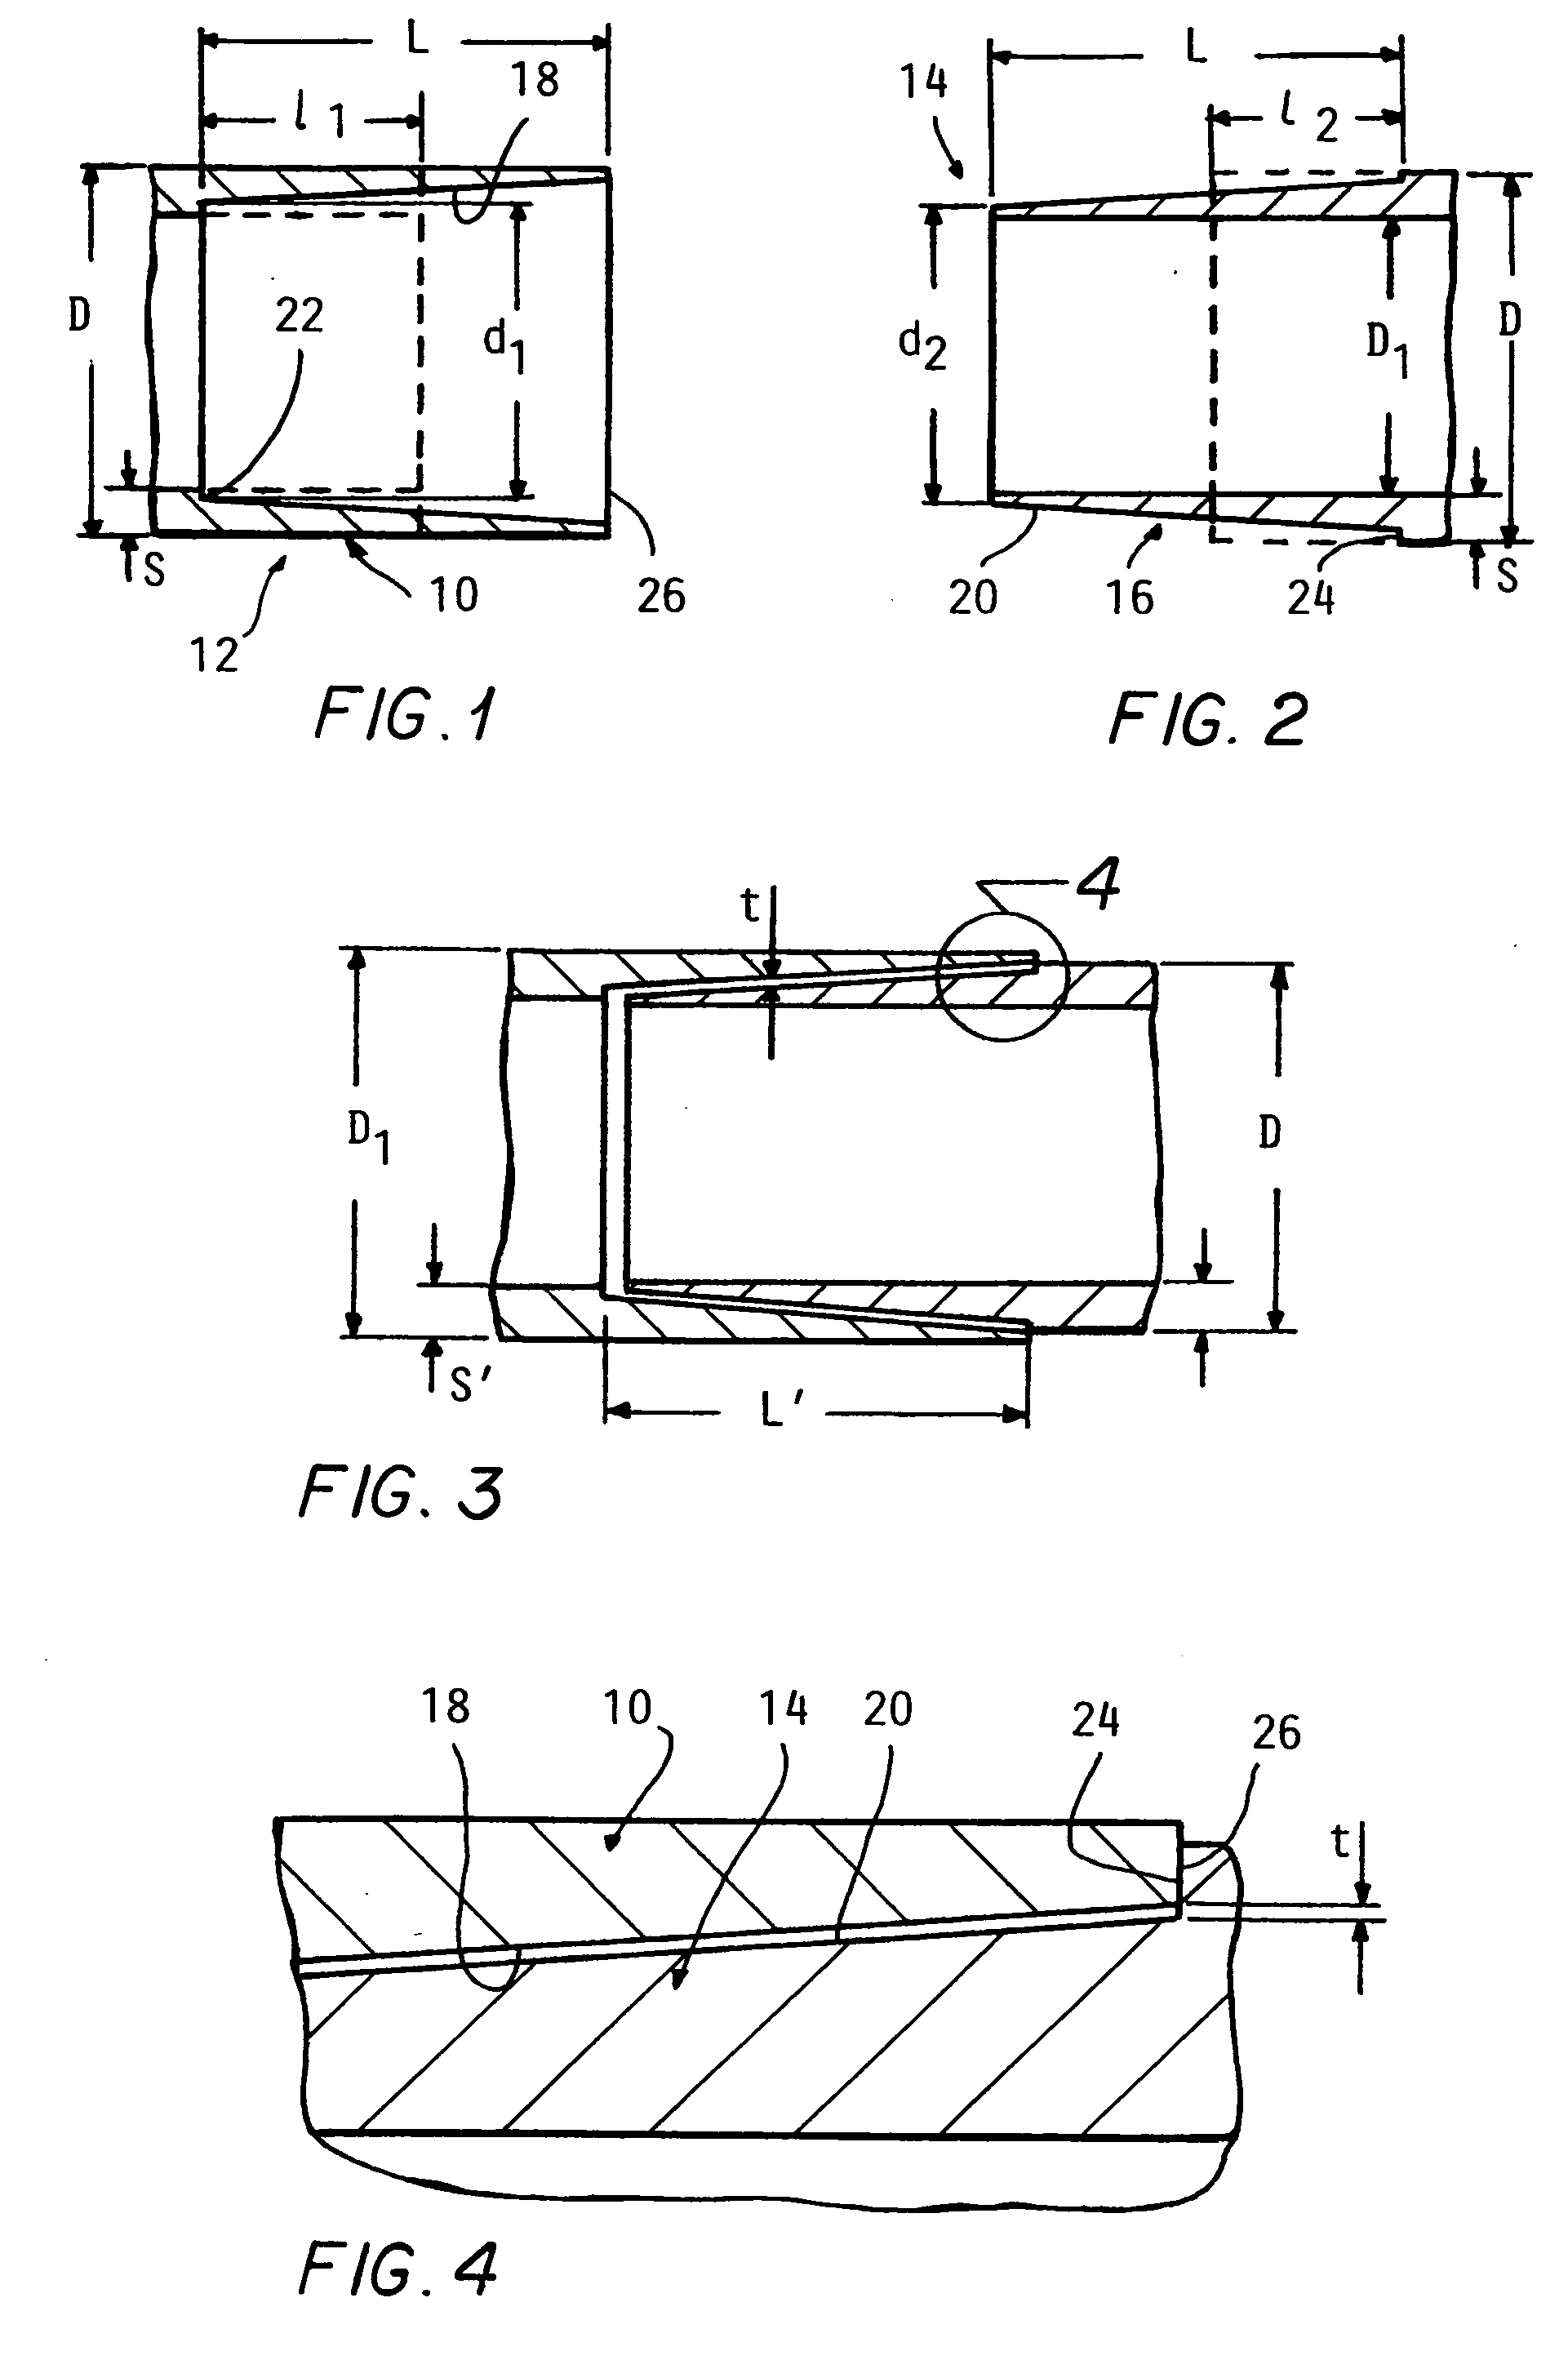 Method for joining ends of sections of pipe